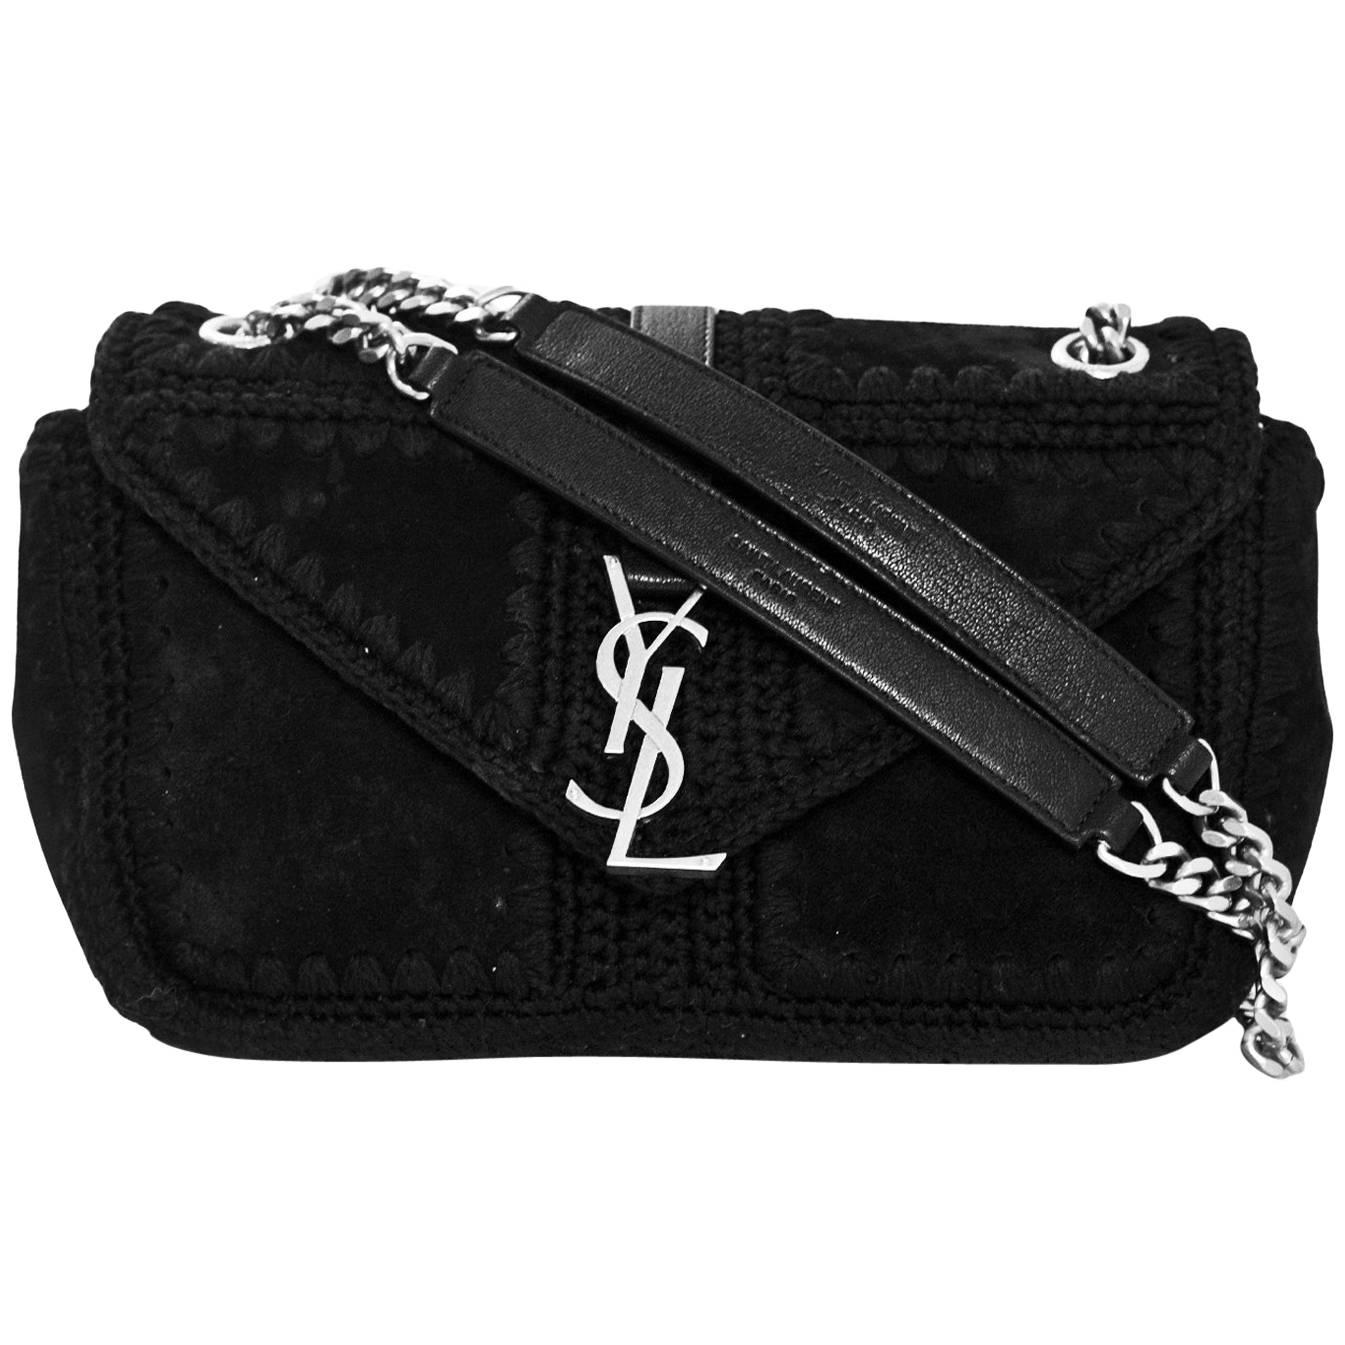 Saint Laurent Black Suede Macrame Monogram Slouchy Chain Medium Shoulder Bag

Made In: Italy
Color: Black
Year Of Production: 2016
Hardware: Silvertone
Materials: Suede, metal
Lining: Black textile
Closure/Opening: Flap top with magnetic snap